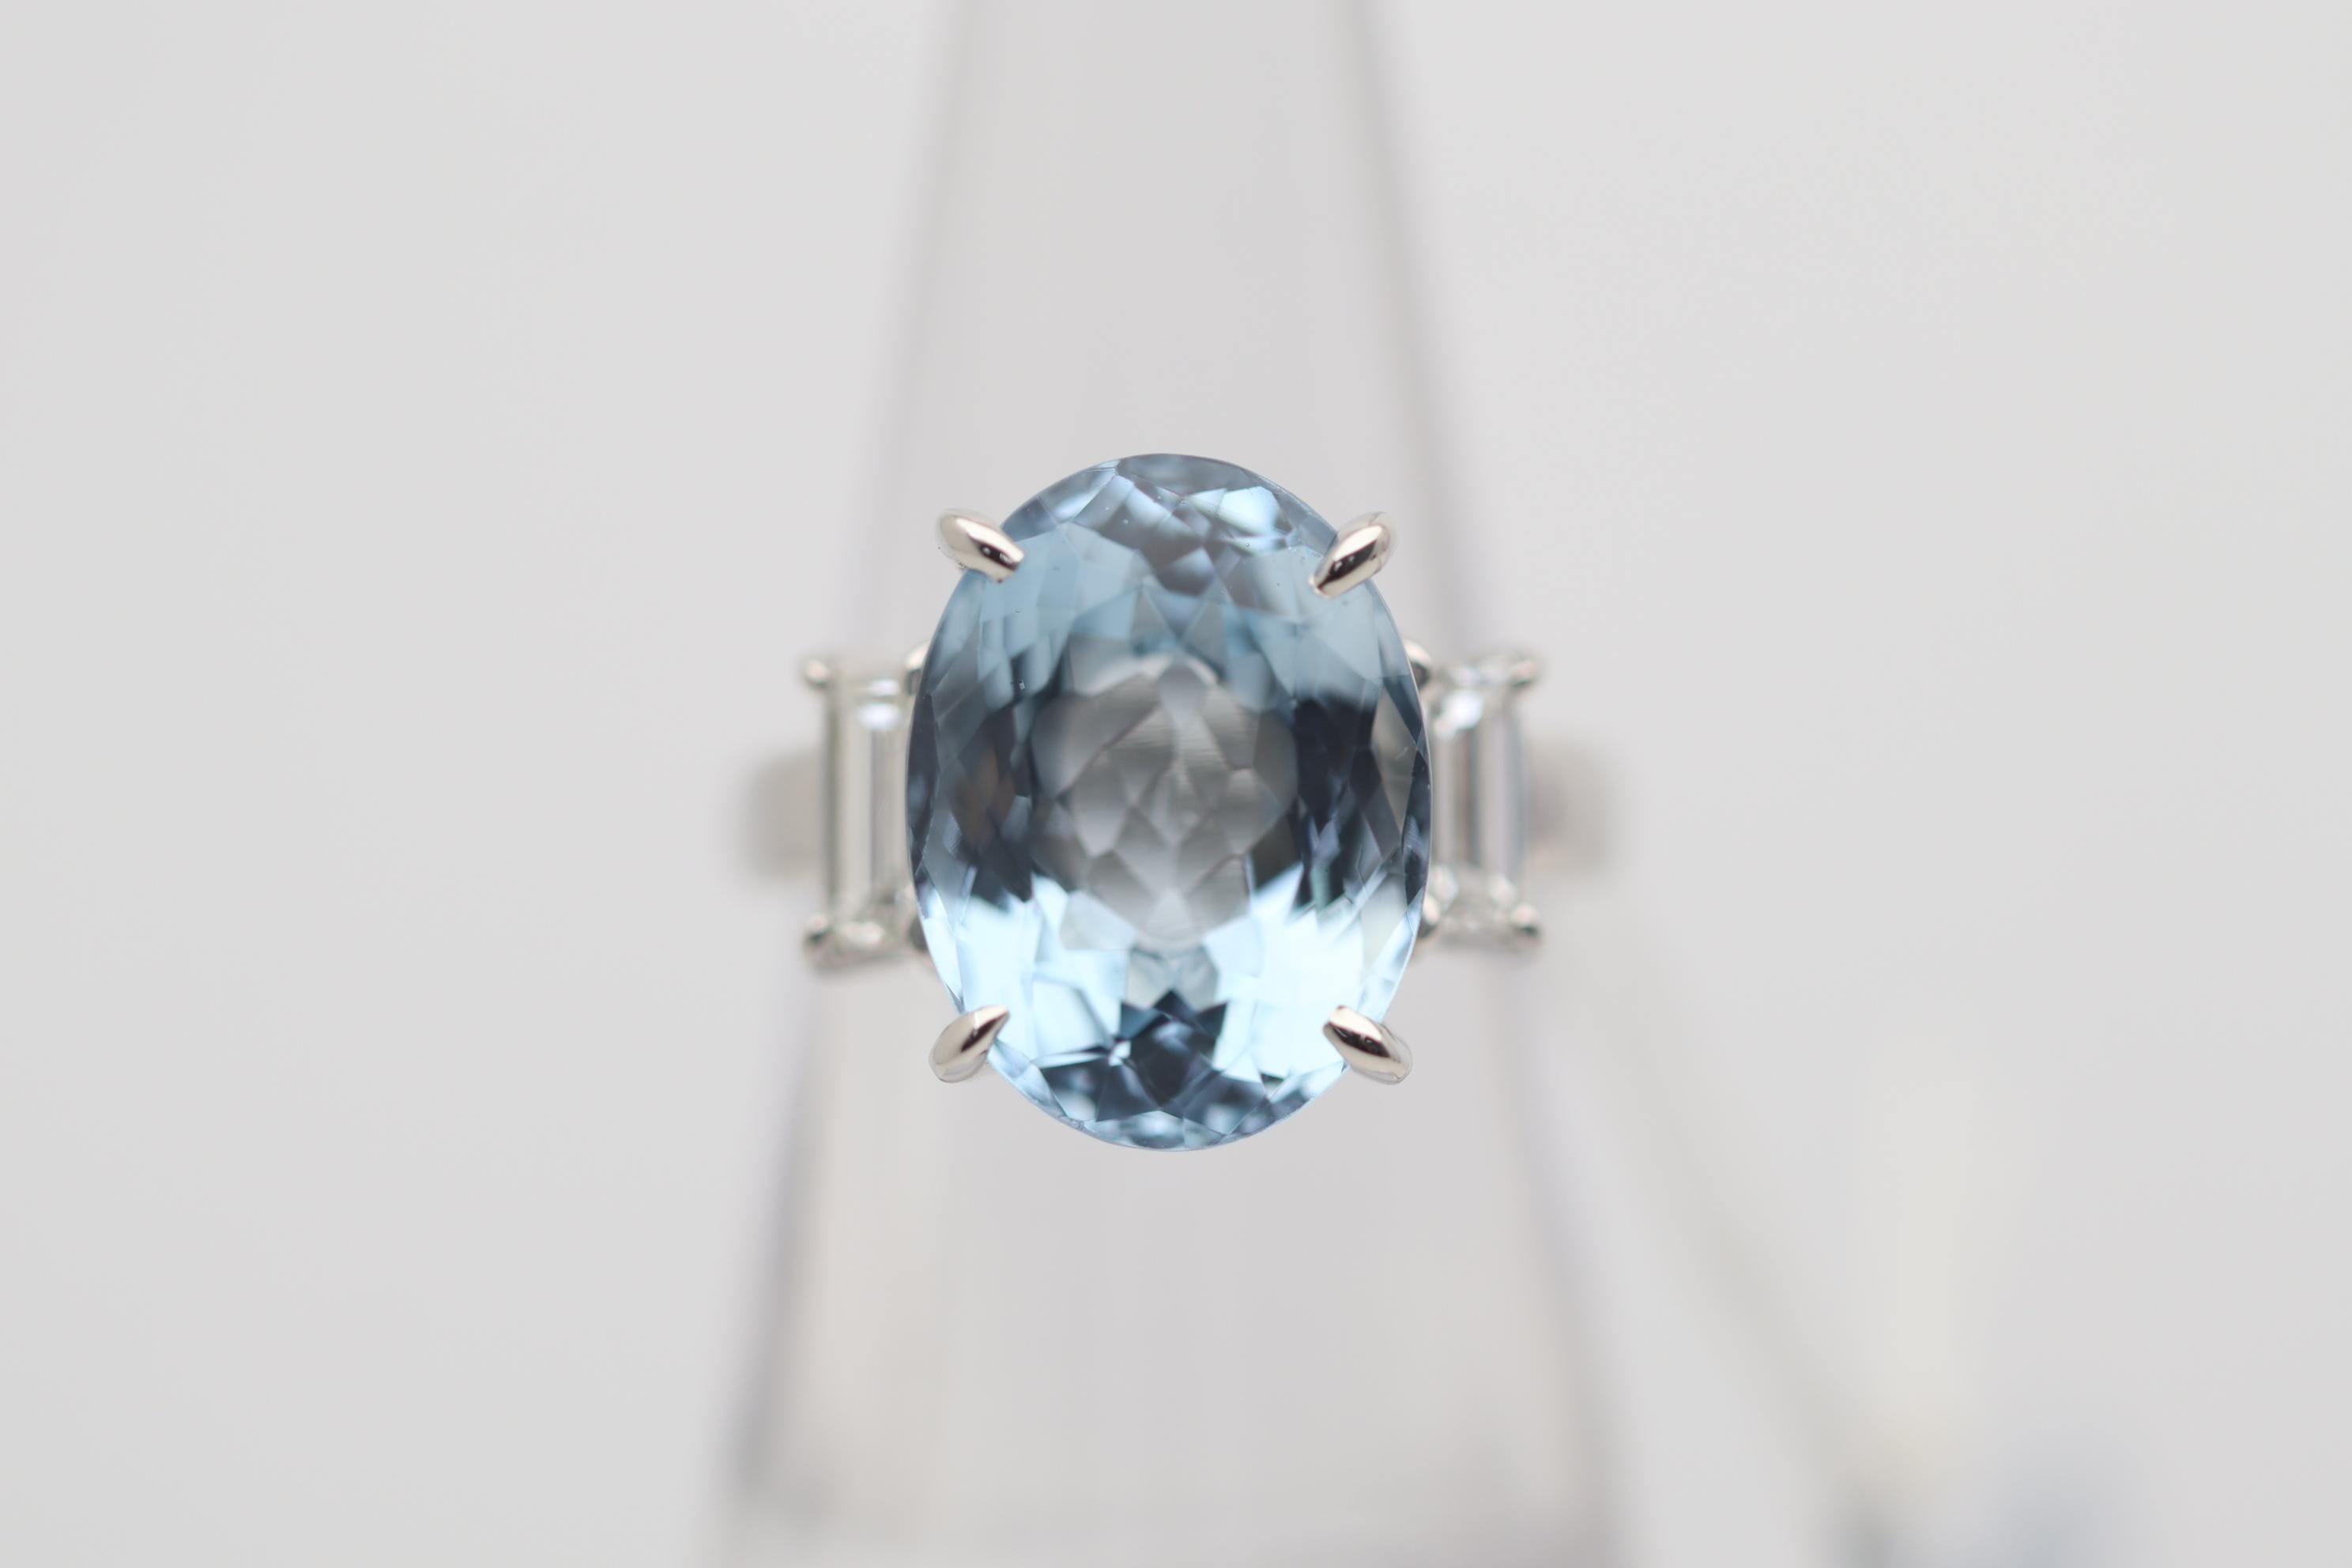 A classic 3-stone ring featuring a large and impressive sea-blue aquamarine weighing 8.28 carats. It has a lovely oval shape and bright clean crystal allowing for great light return. It is complemented by two large baguette-cut diamonds set on its